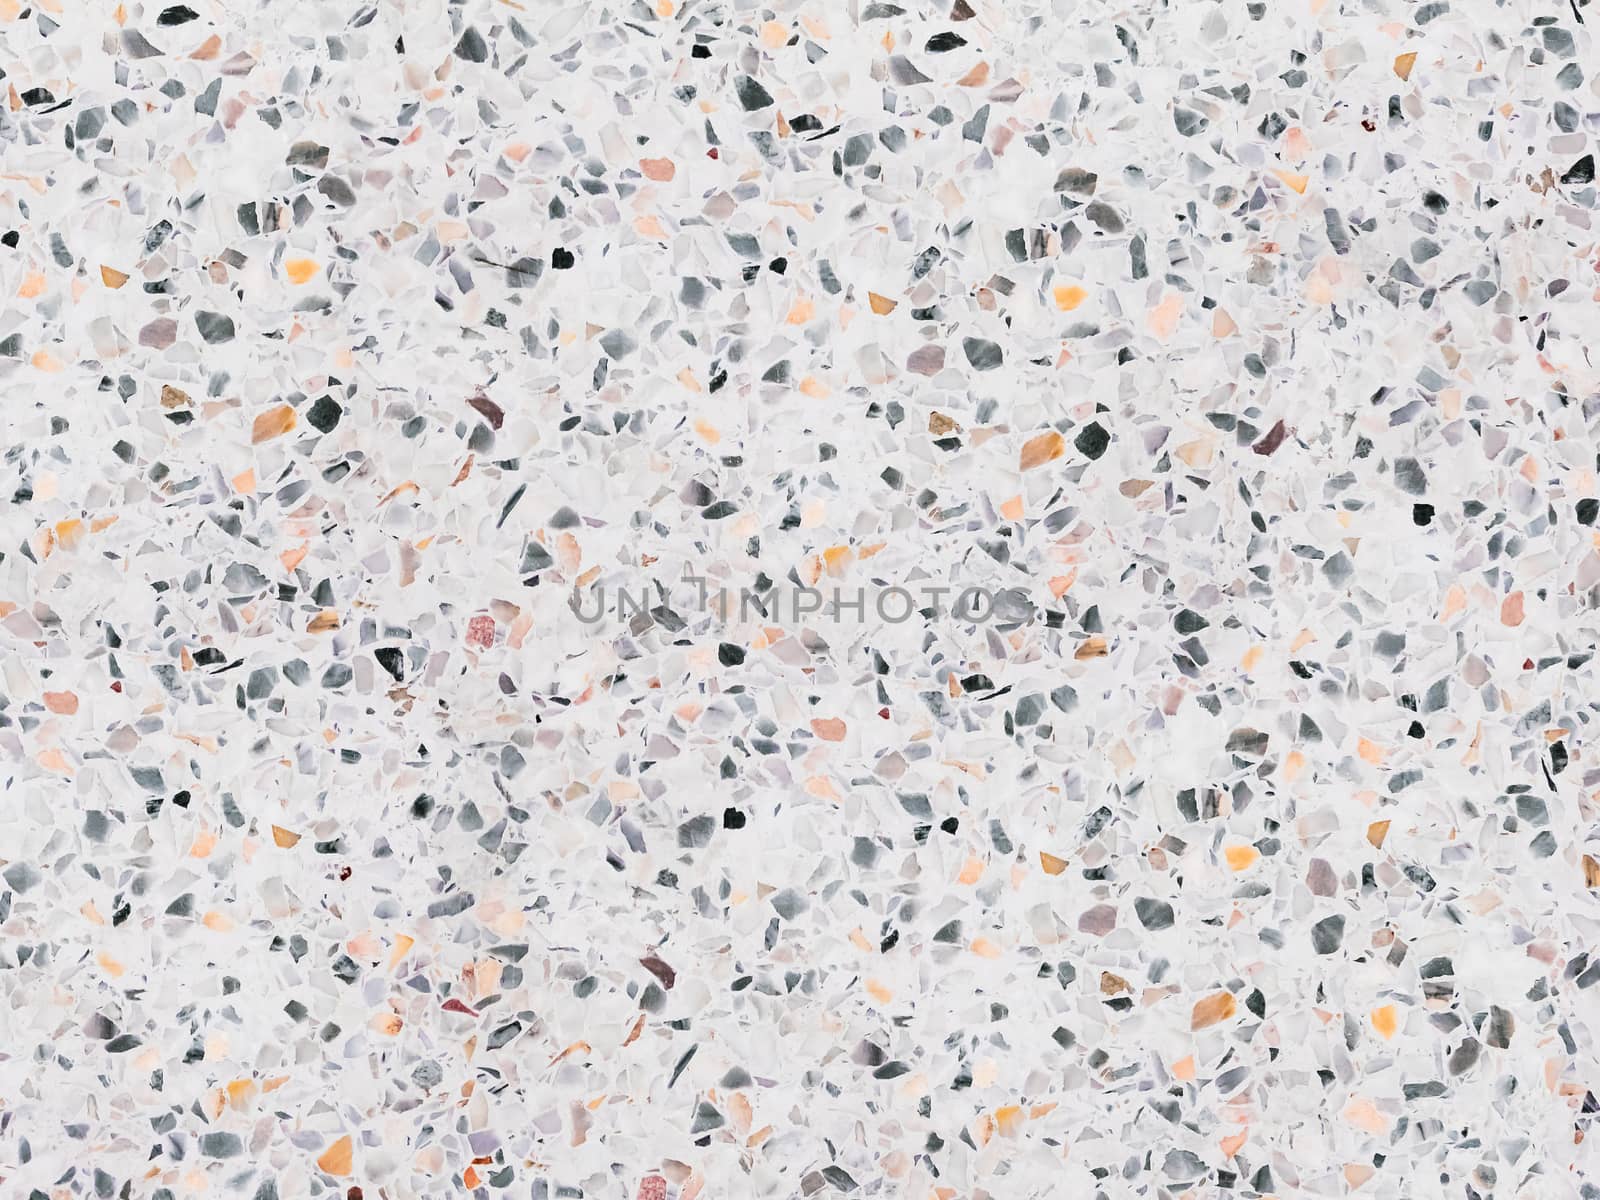 terrazzo floor or marble beautiful old texture, polished stone wall for background